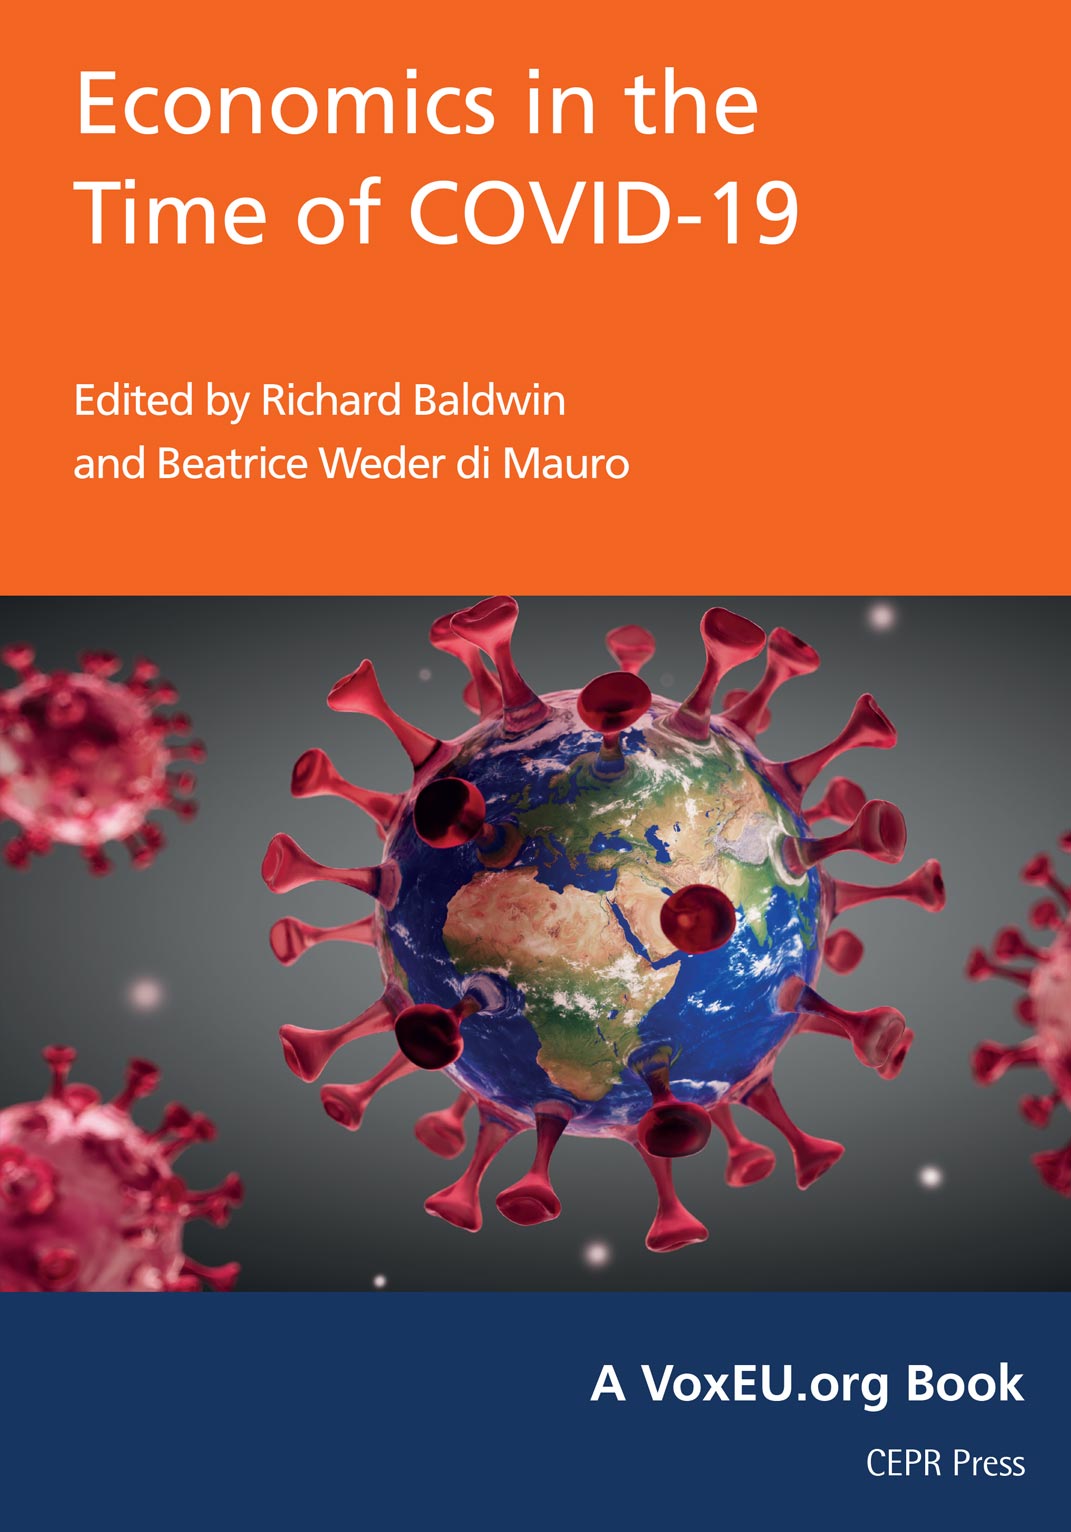 2020_trade_and_travel_in_the_time_of_epidemics_voxeu